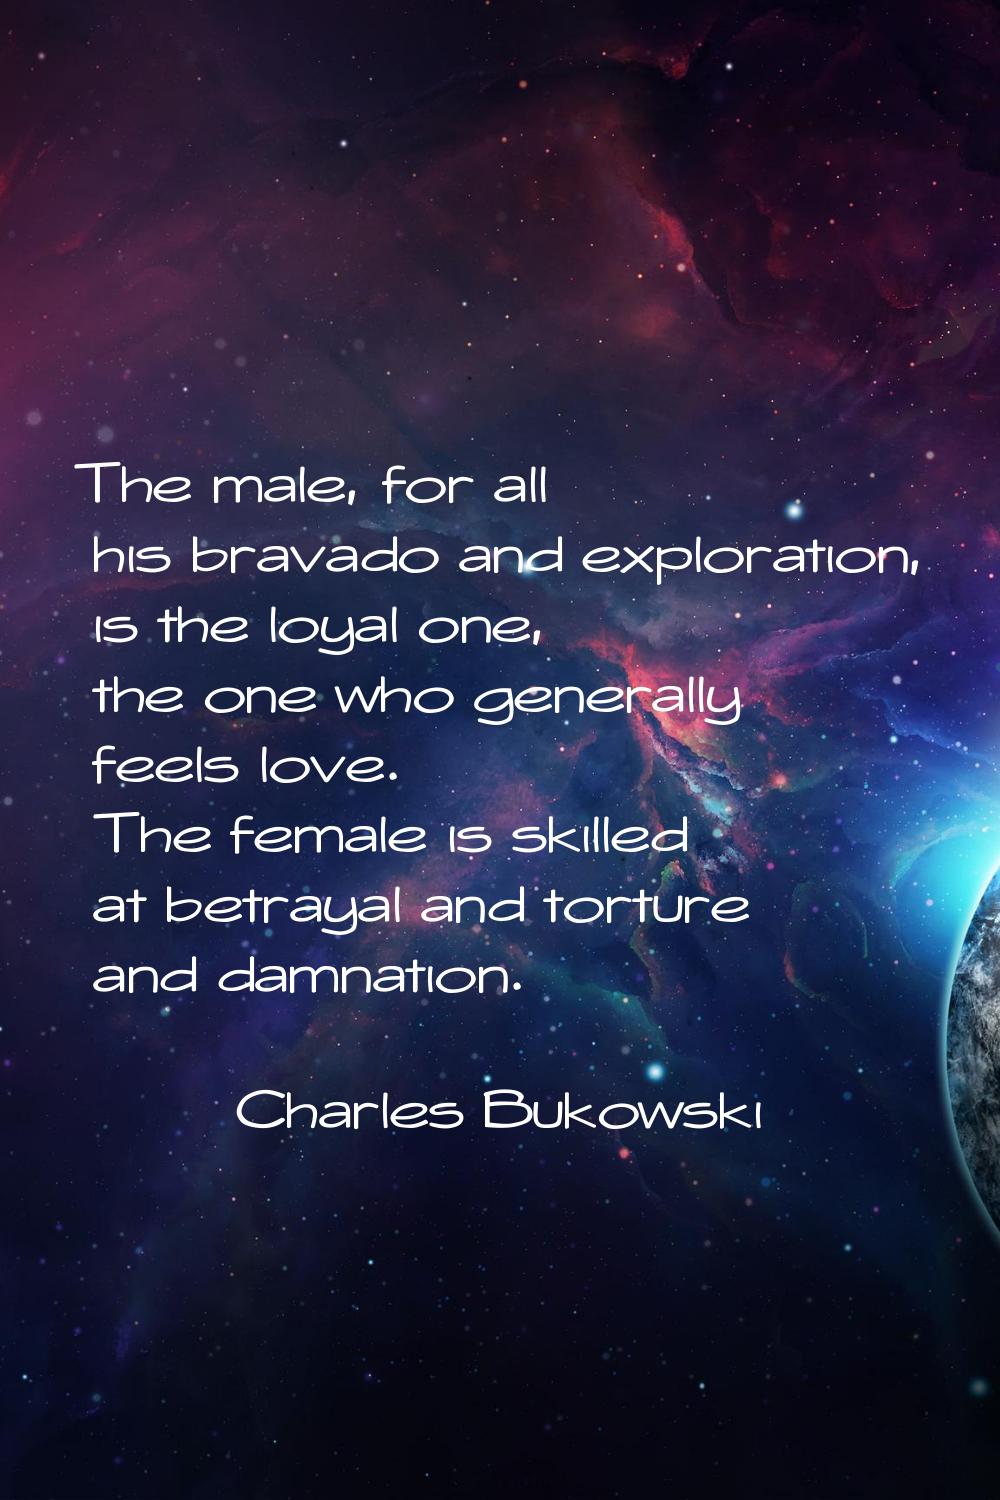 The male, for all his bravado and exploration, is the loyal one, the one who generally feels love. 